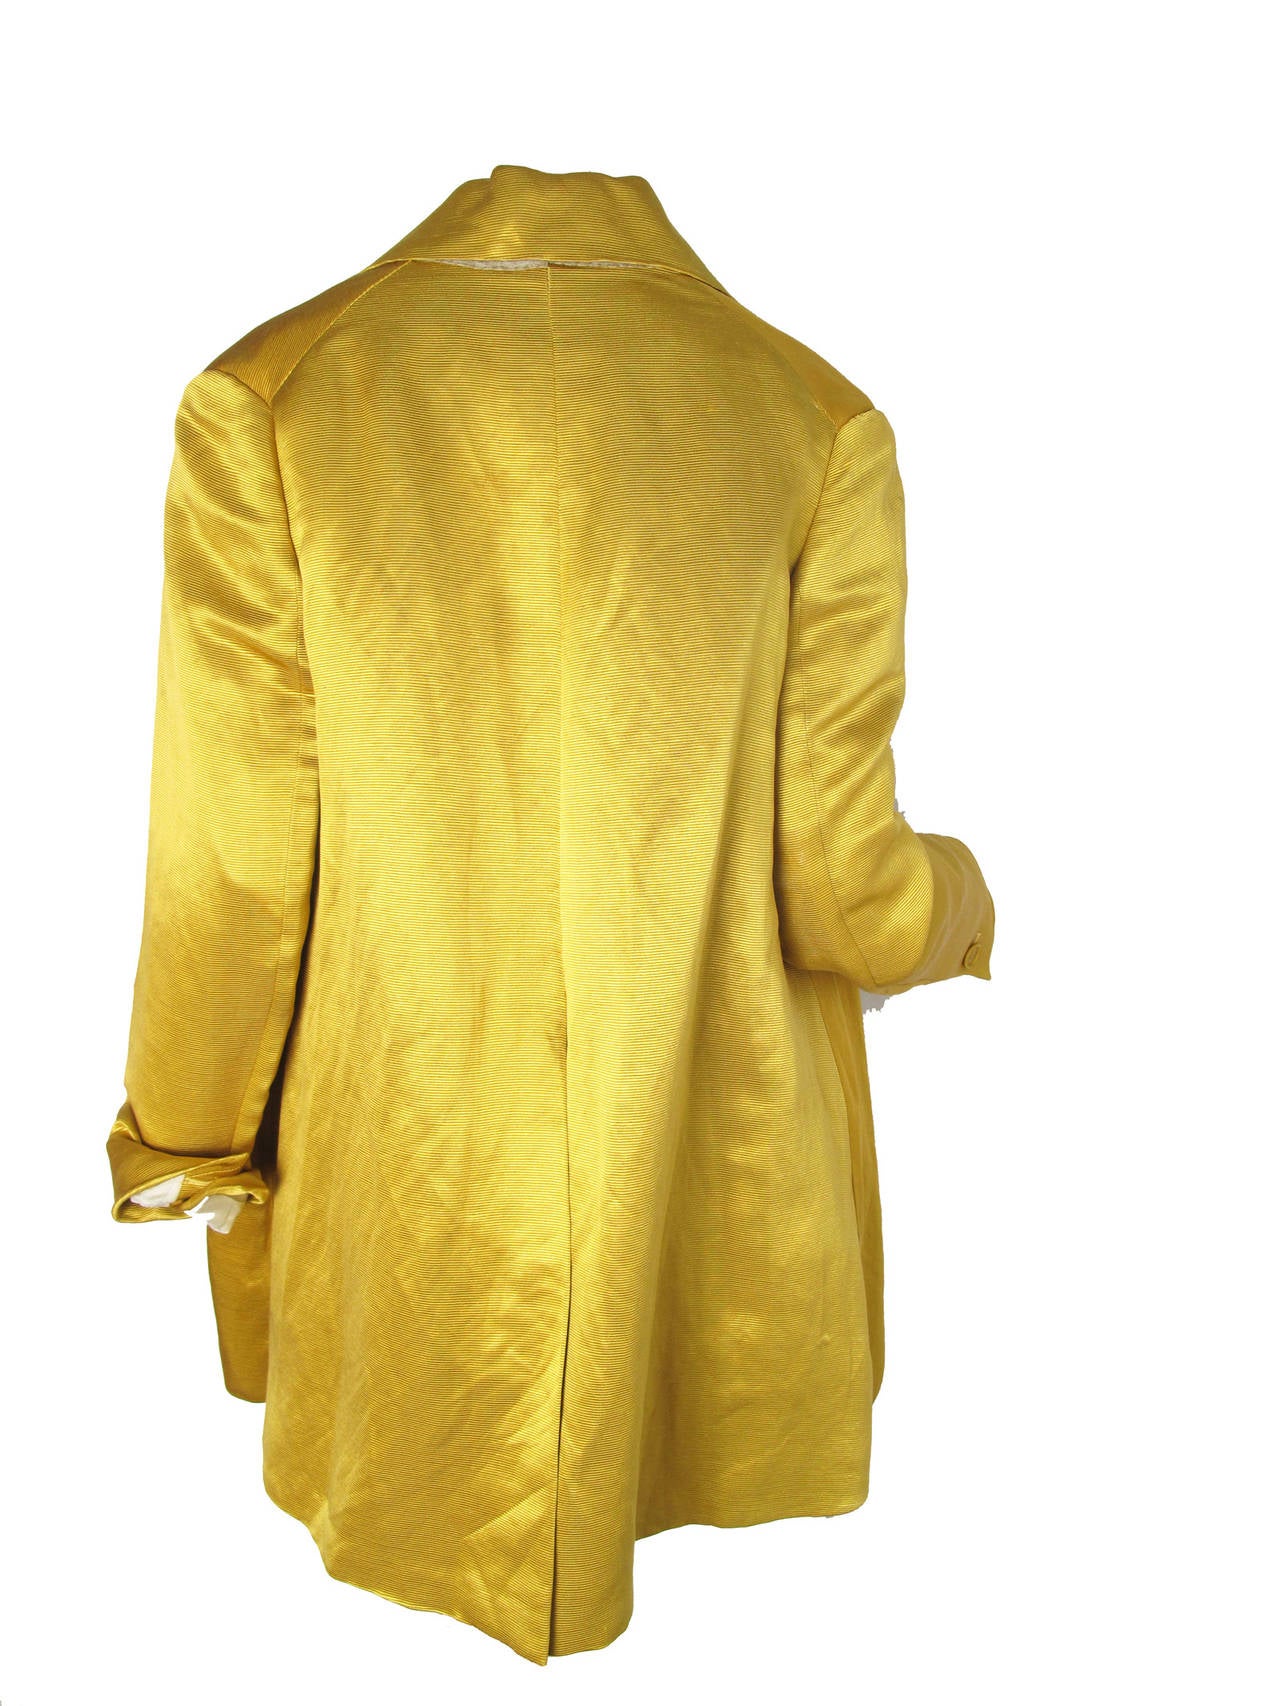 Romeo Gigli yellow silk blend one button closure jacket / coat.
 Sz 38 
Made in Italy
Condition: Spot on sleeve, see photos.